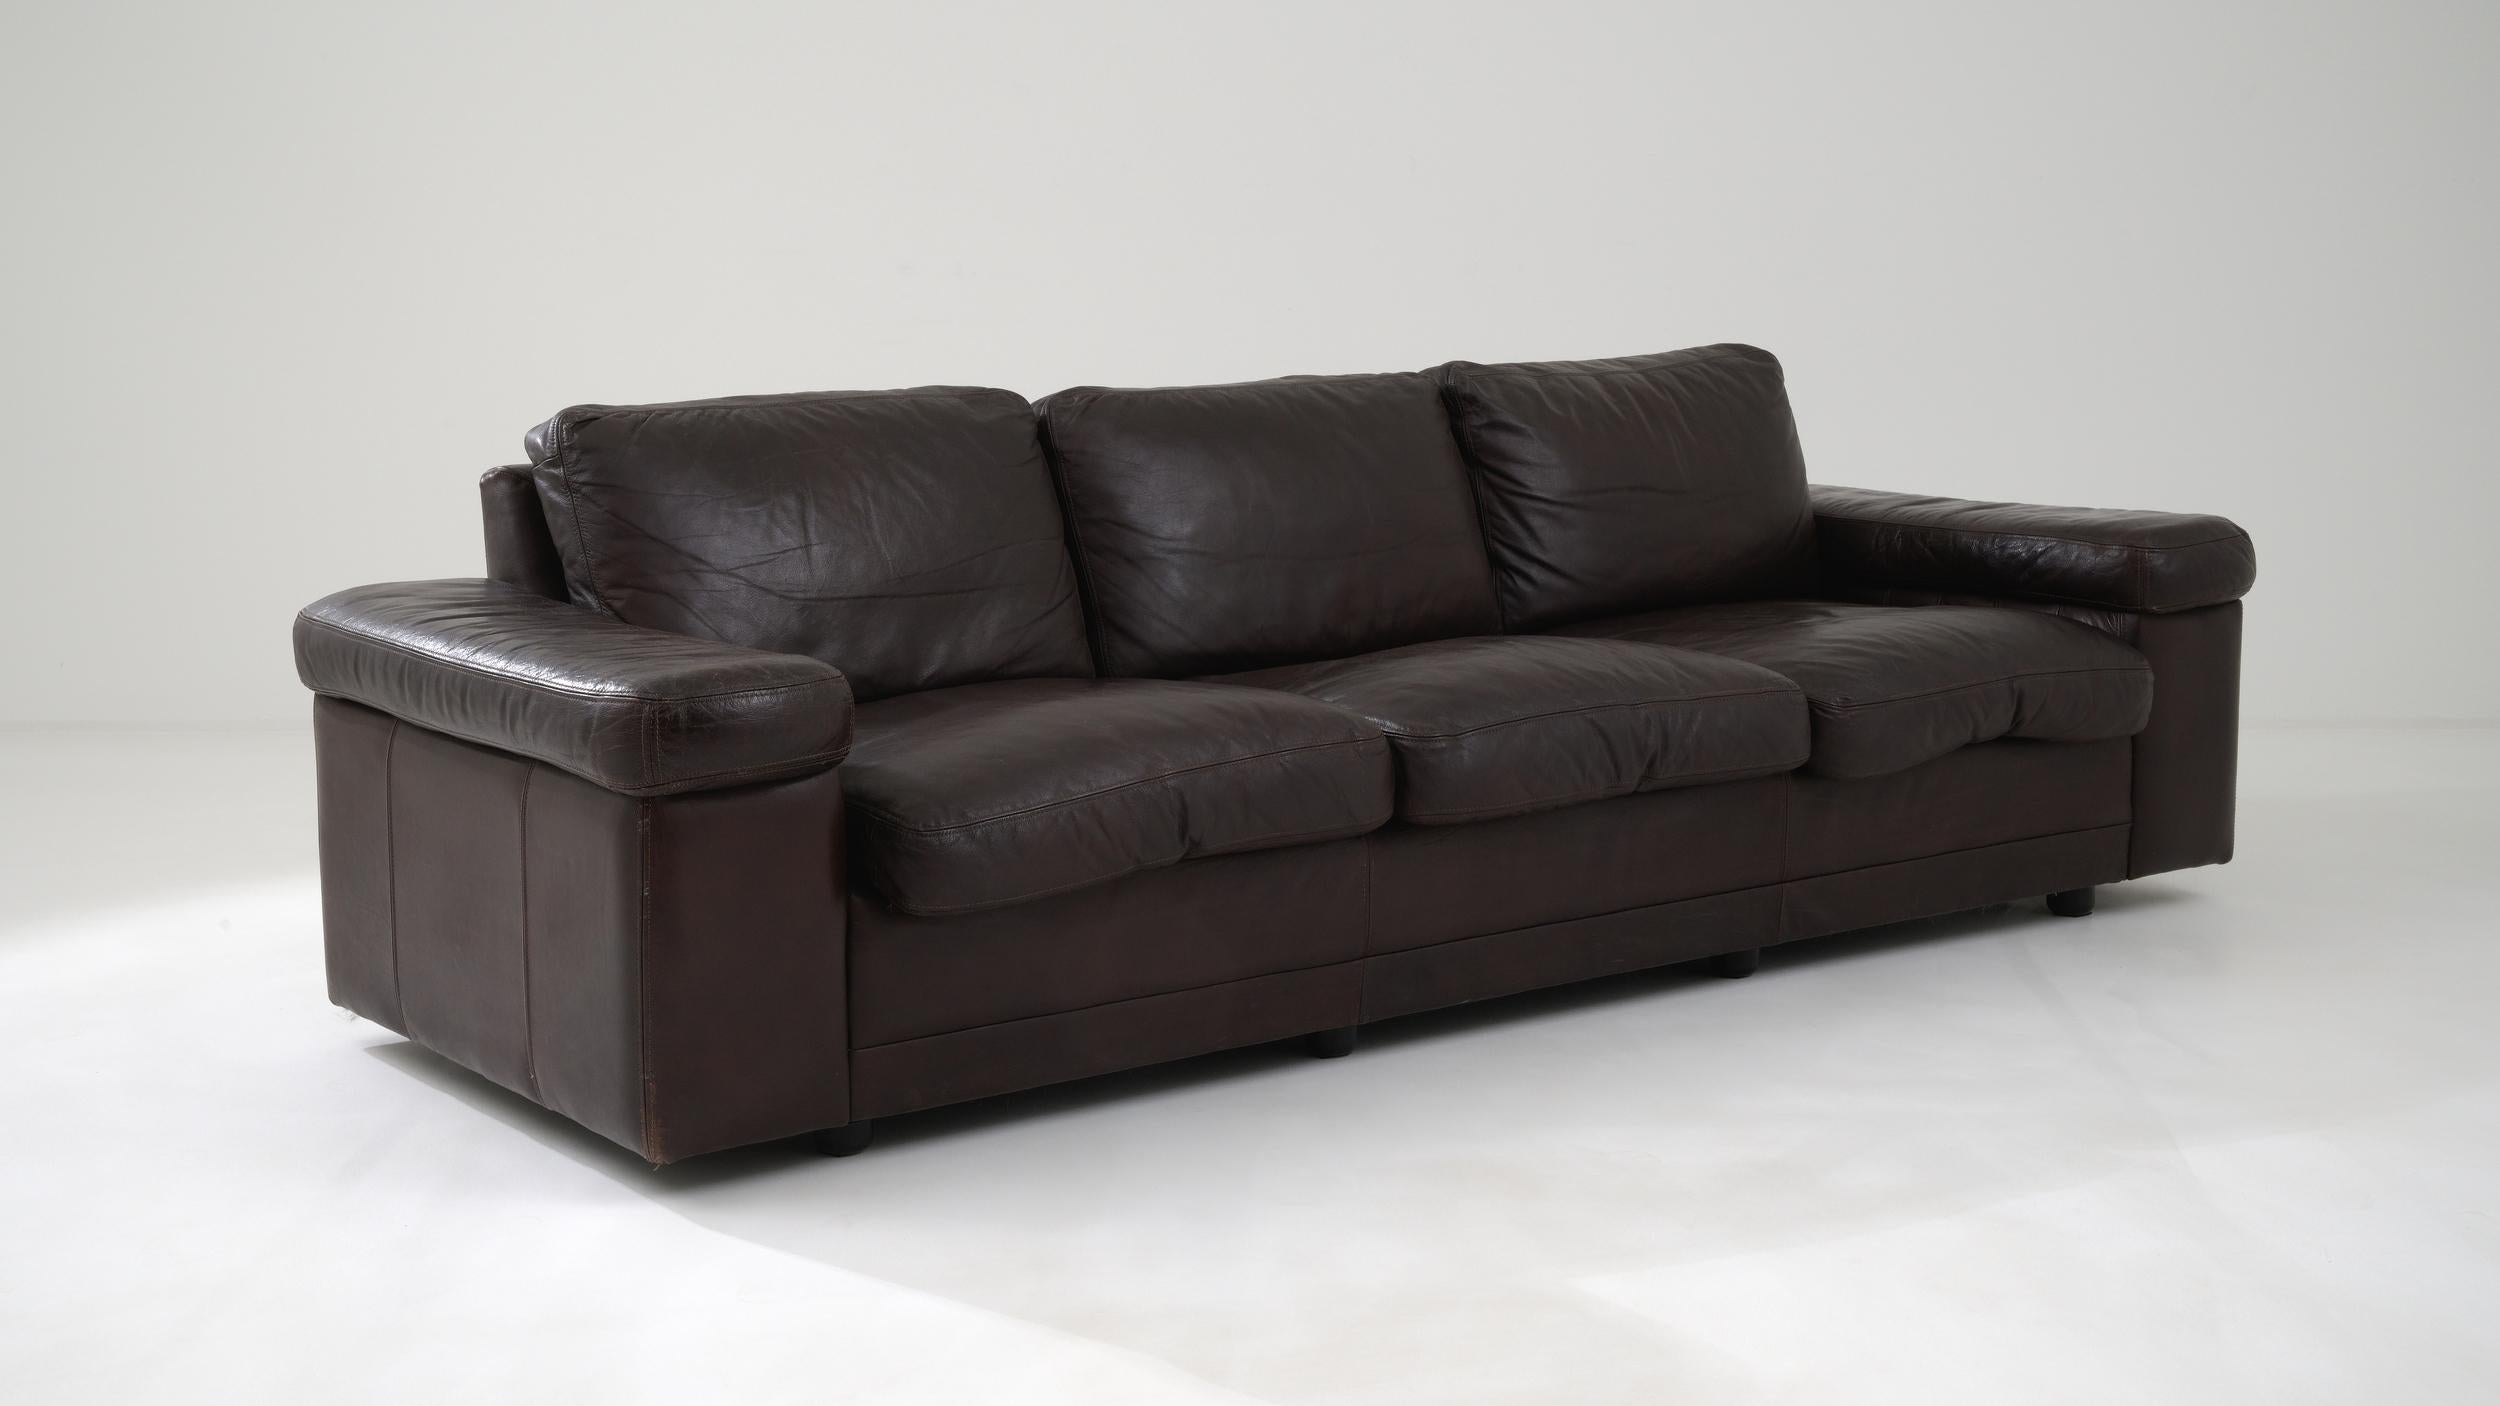 20th Century German Upholstered Leather Sofa In Good Condition For Sale In High Point, NC